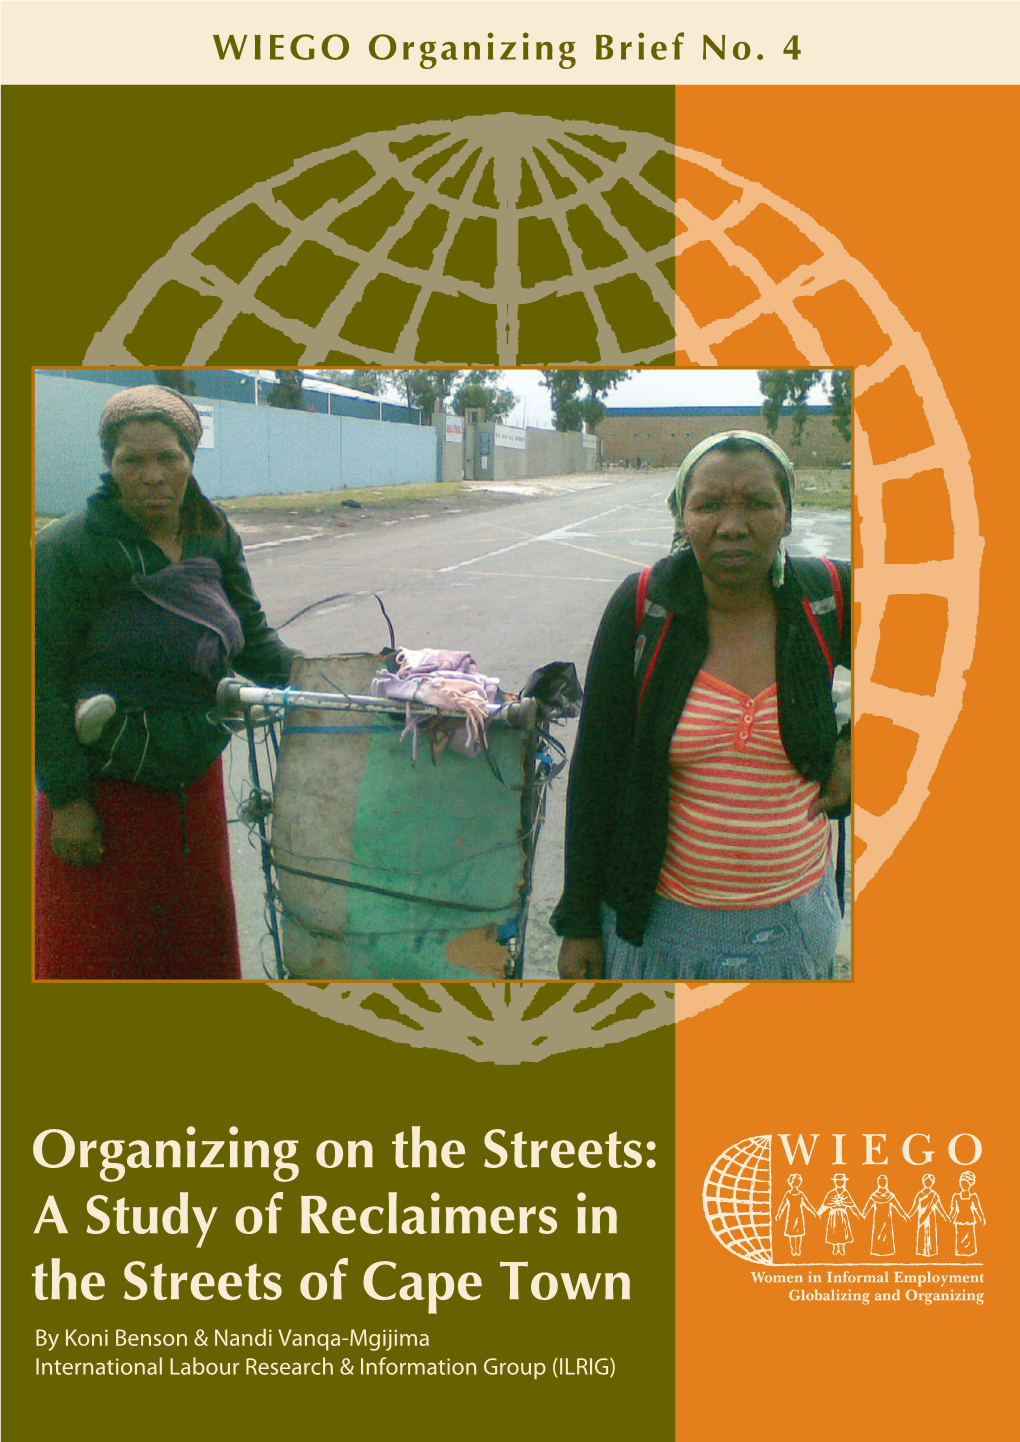 Organizing on the Streets: a Study of Reclaimers in the Streets of Cape